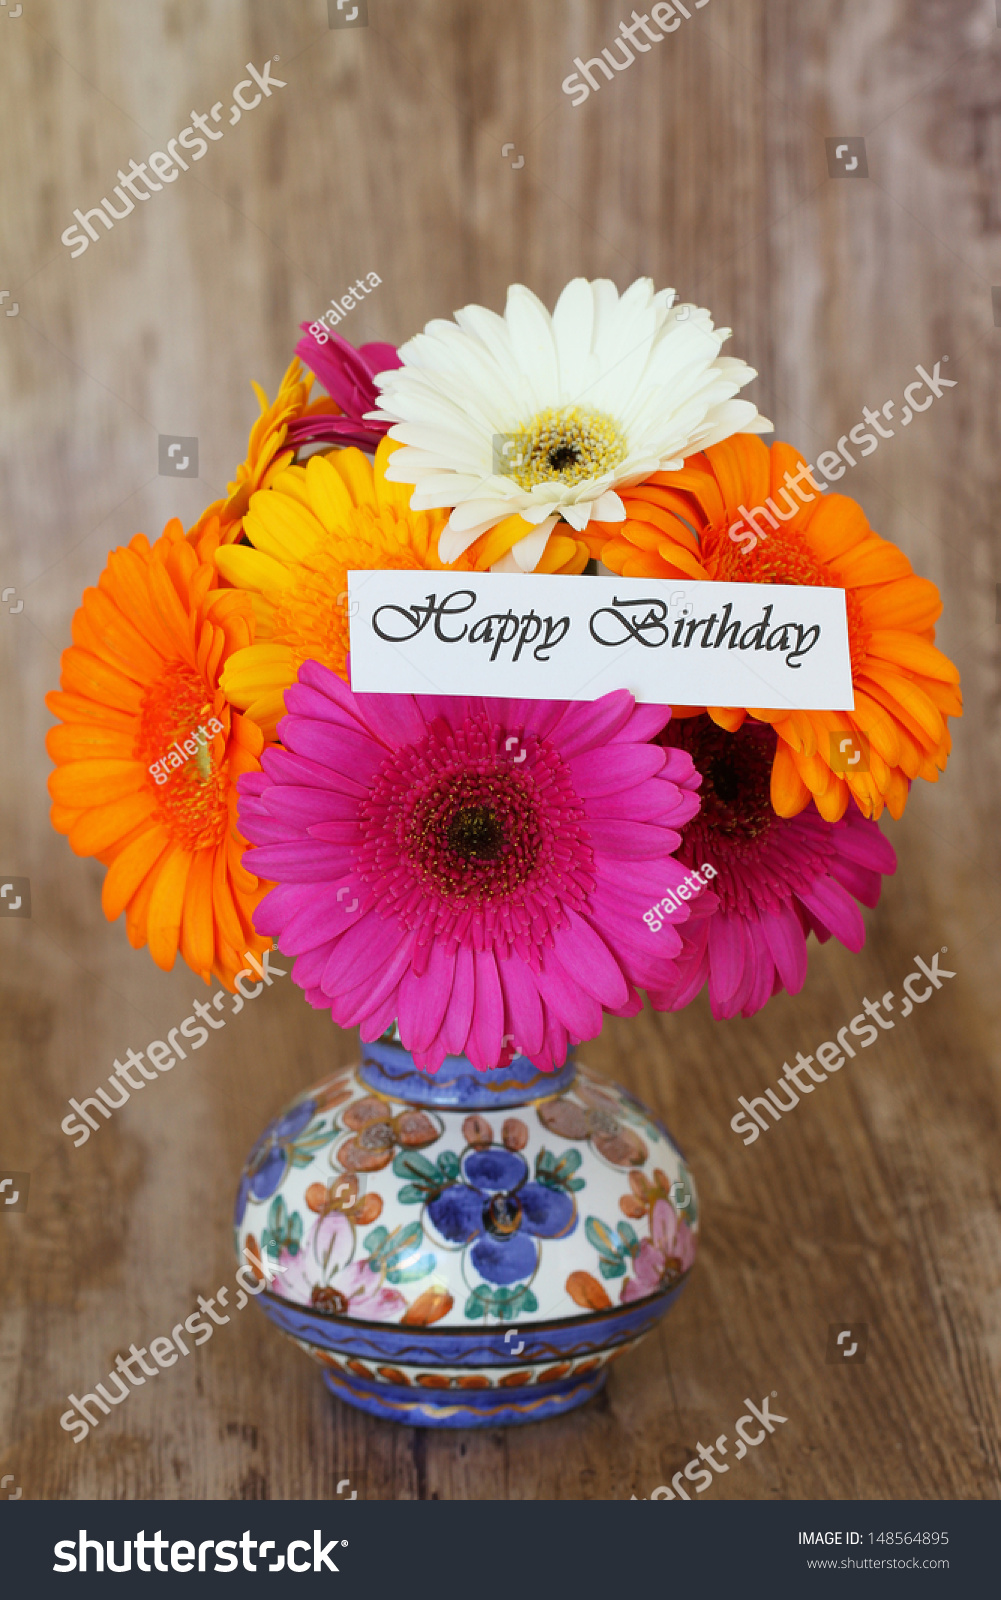 Happy Birthday Card And Colorful Bouquet Of Gerbera Daisies In Vintage ...